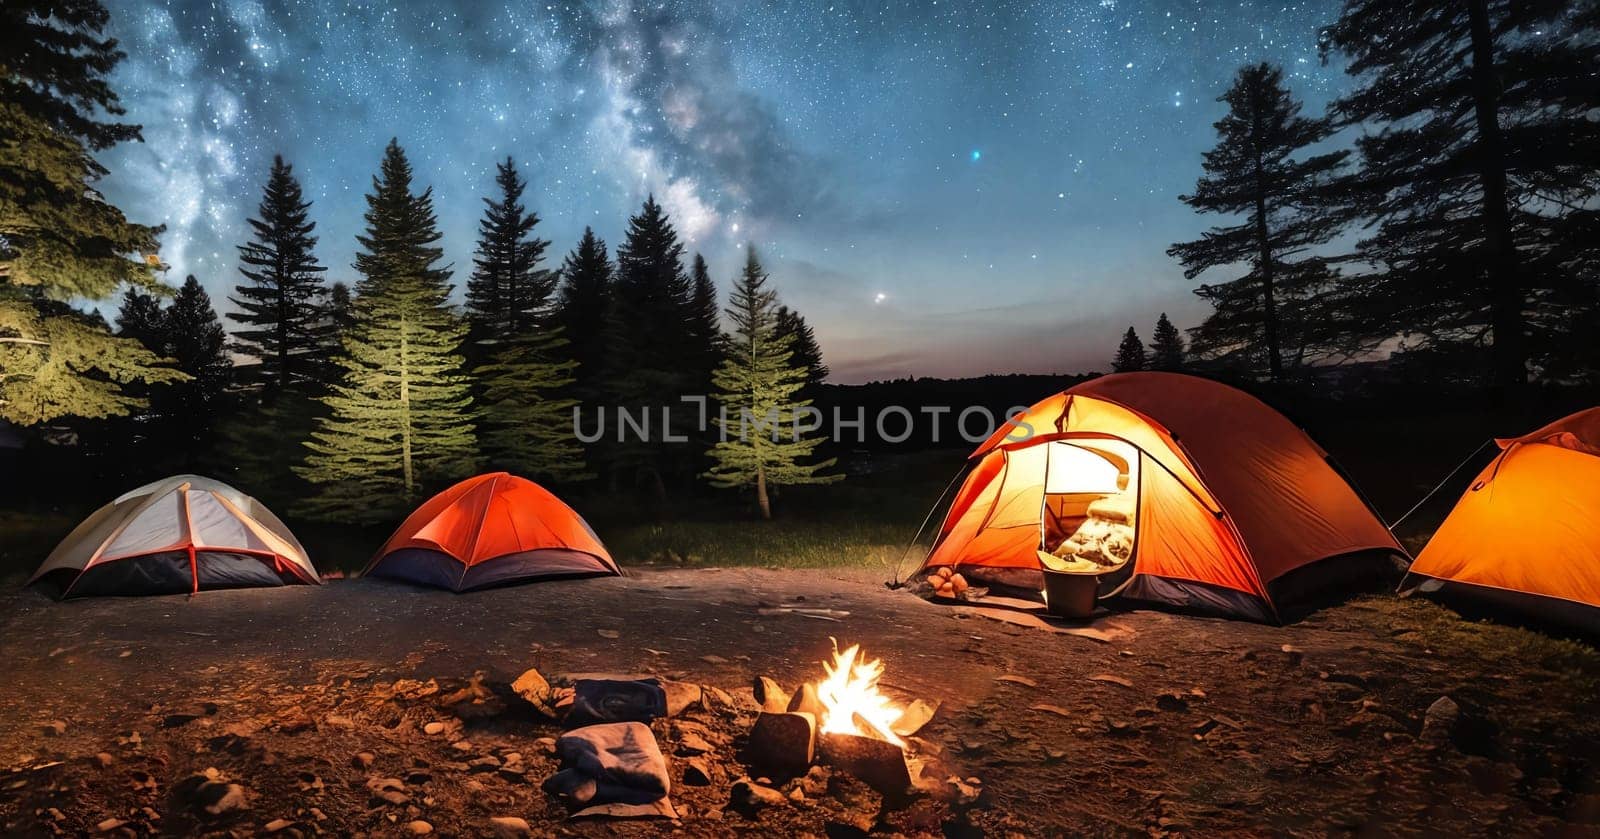 Set up a cozy camping scene with a tent pitched under the starry night sky, illuminated by a warm campfire by GoodOlga